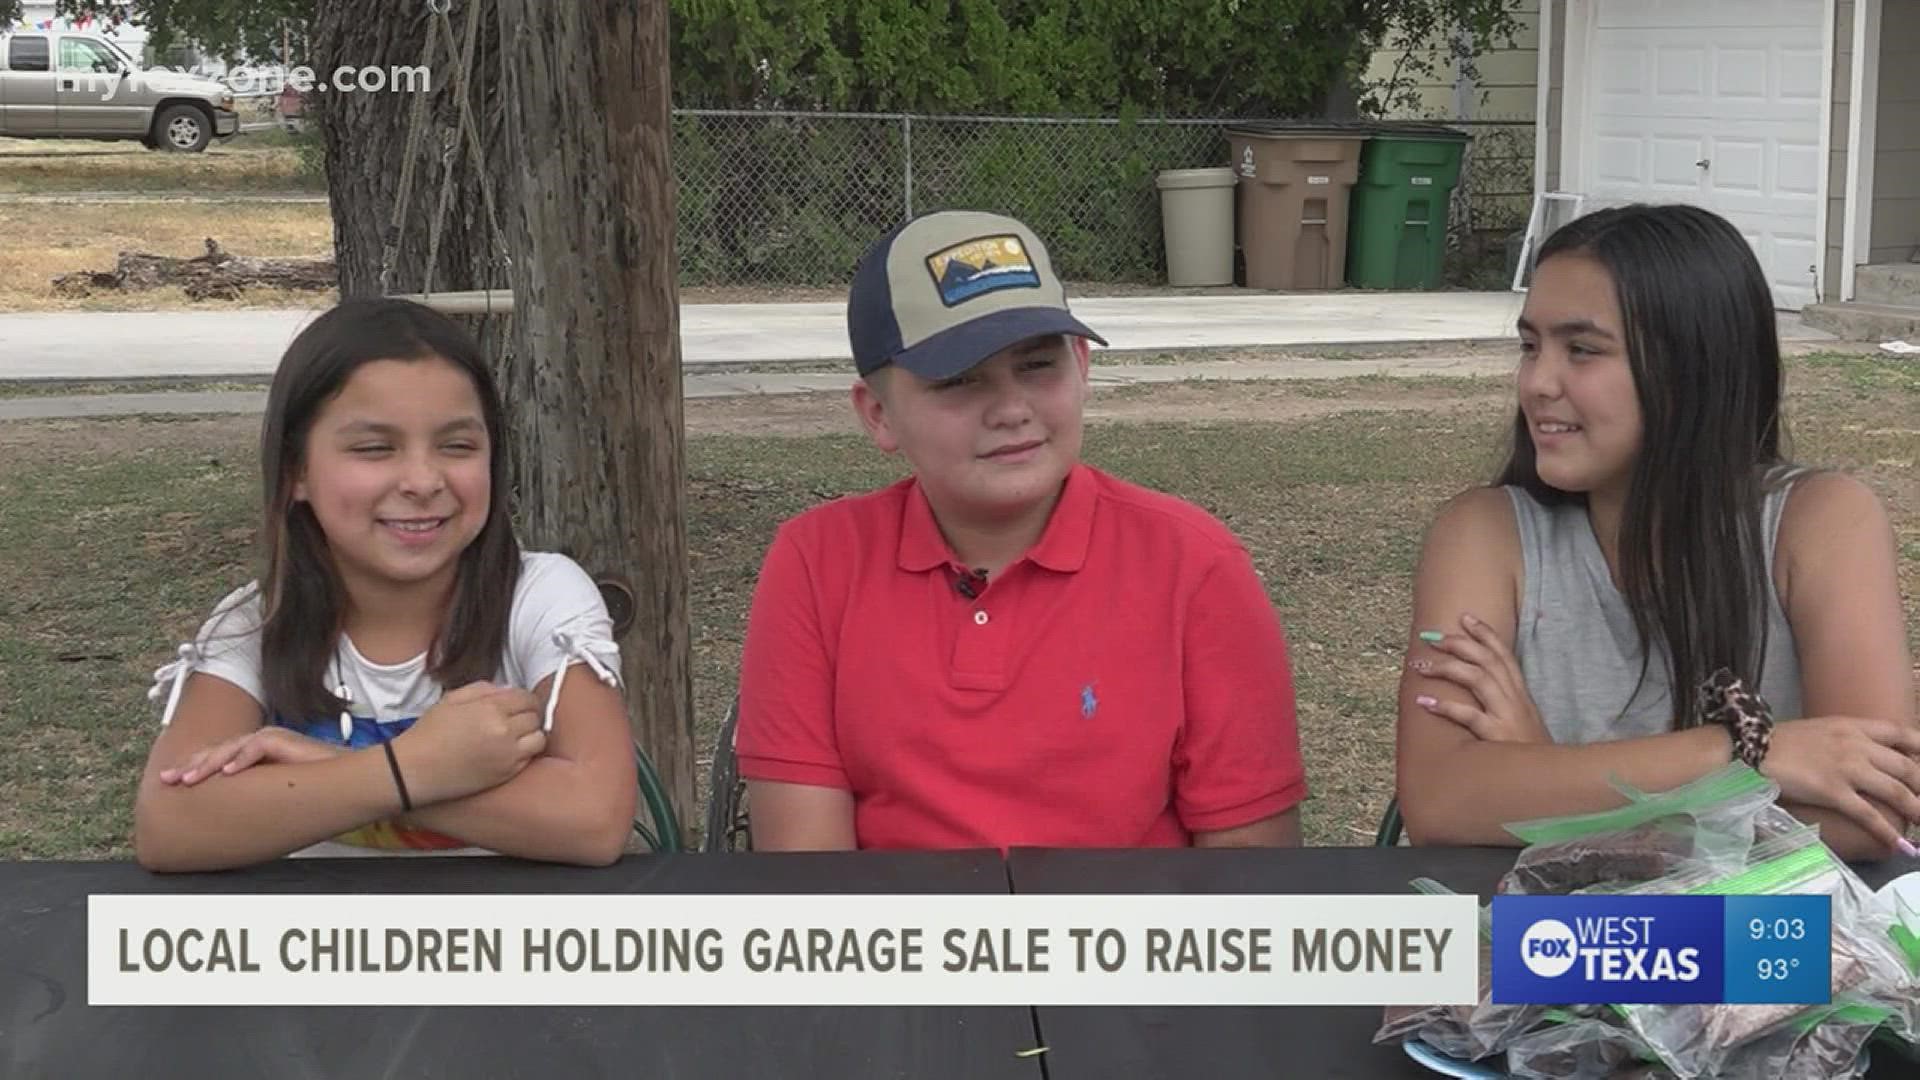 Three San Angelo children had an idea to hold a garage sale in the community, so they're making it happen!